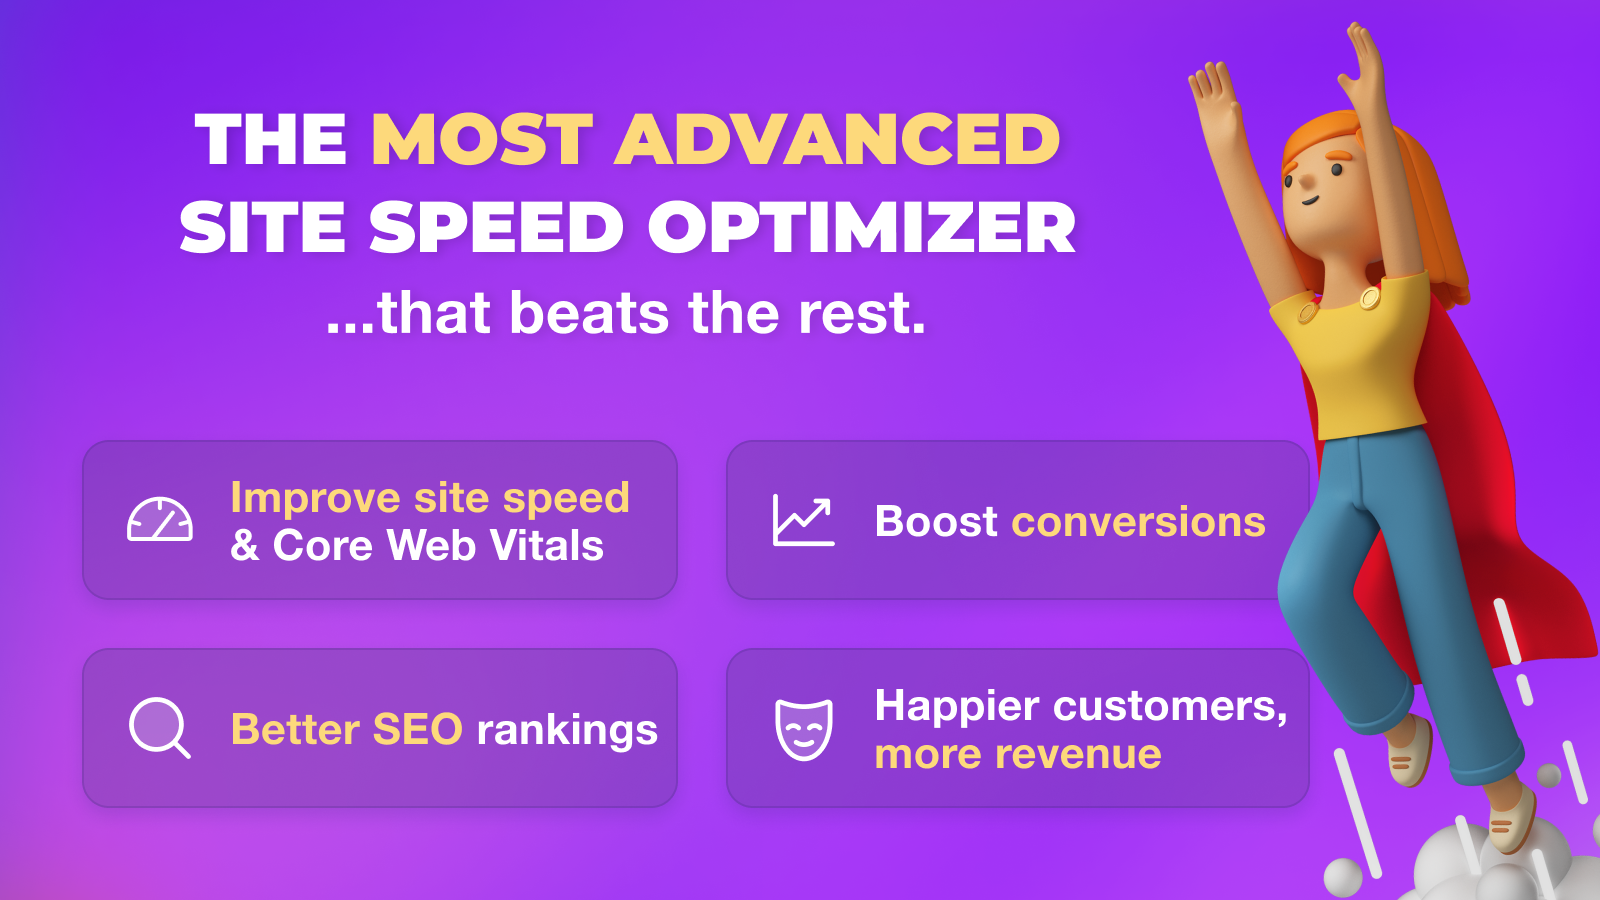 The most advanced site speed optimizer